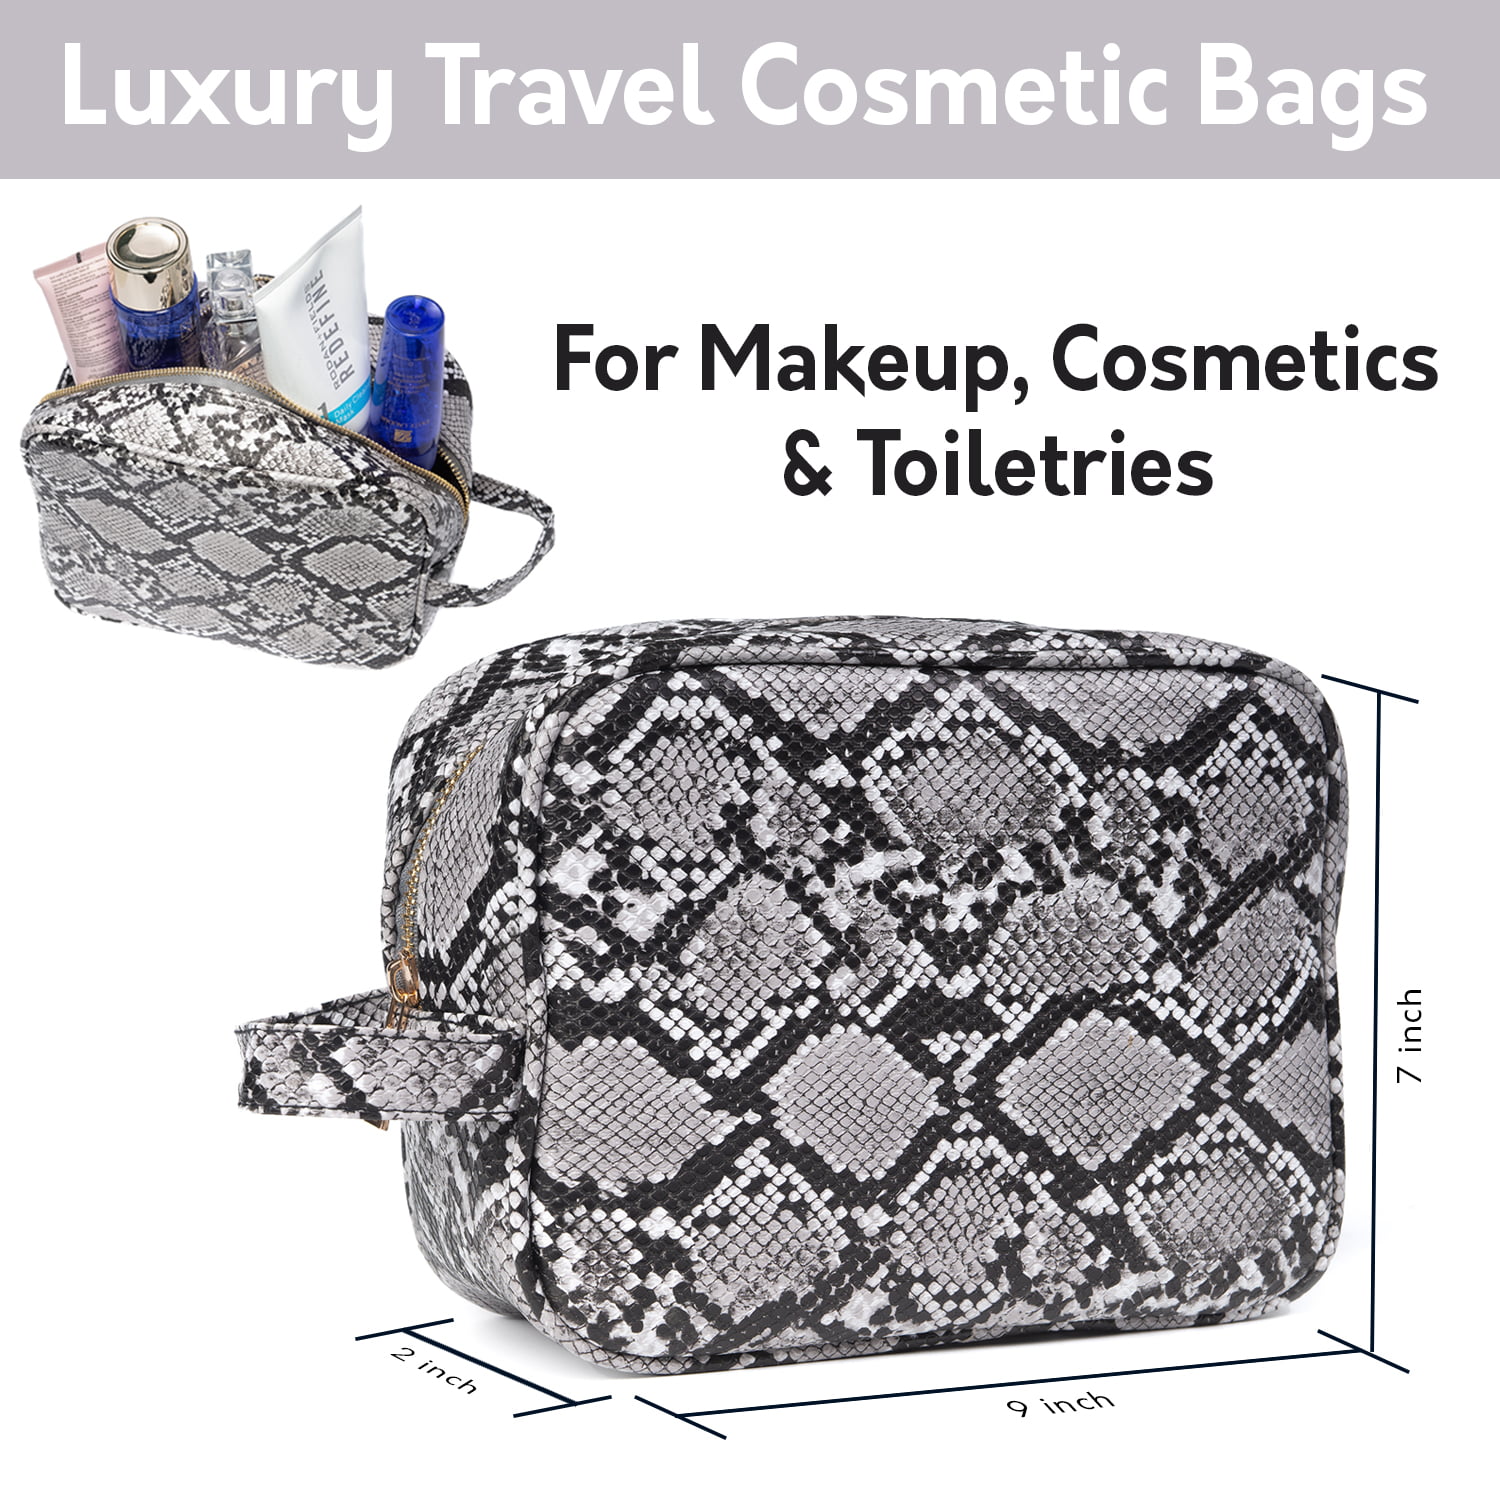 Pre-Owned Cosmetic bags - Affordable Luxury